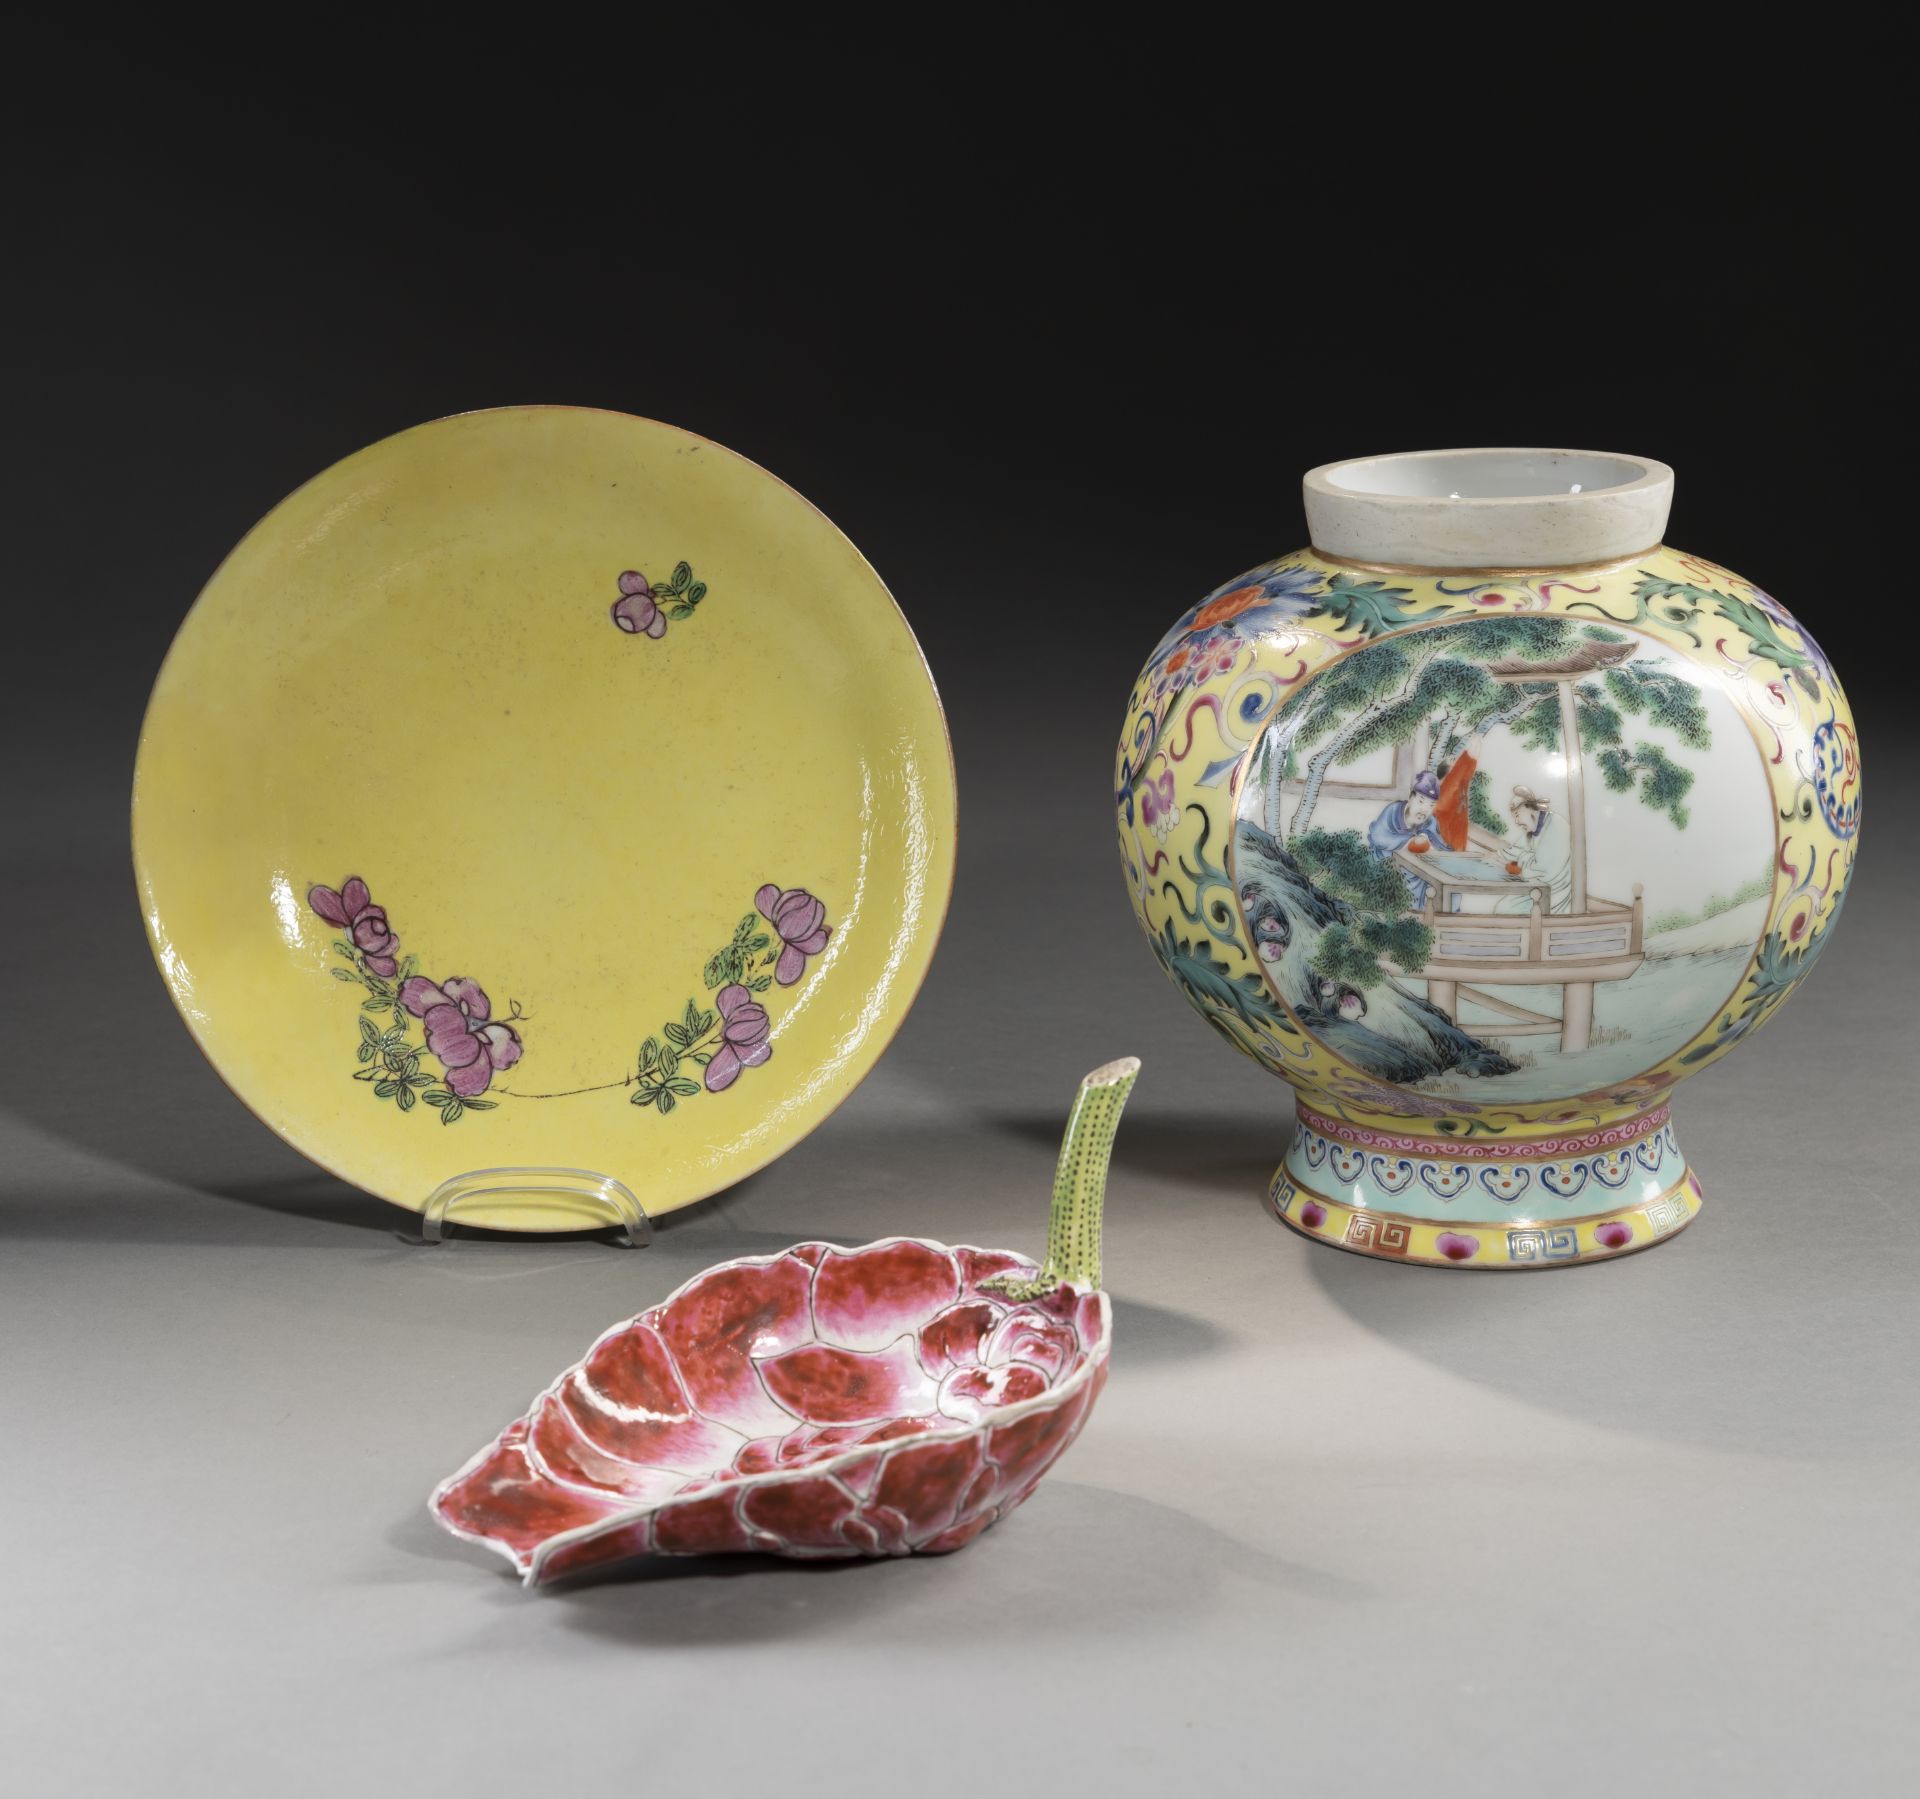 A YELLOW-GROUND 'FAMILLE ROSE' PORCELAIN VASE, A YELLOW DISH, AND A LOTUS-SHAPED LIBATION VESSEL - Image 2 of 4